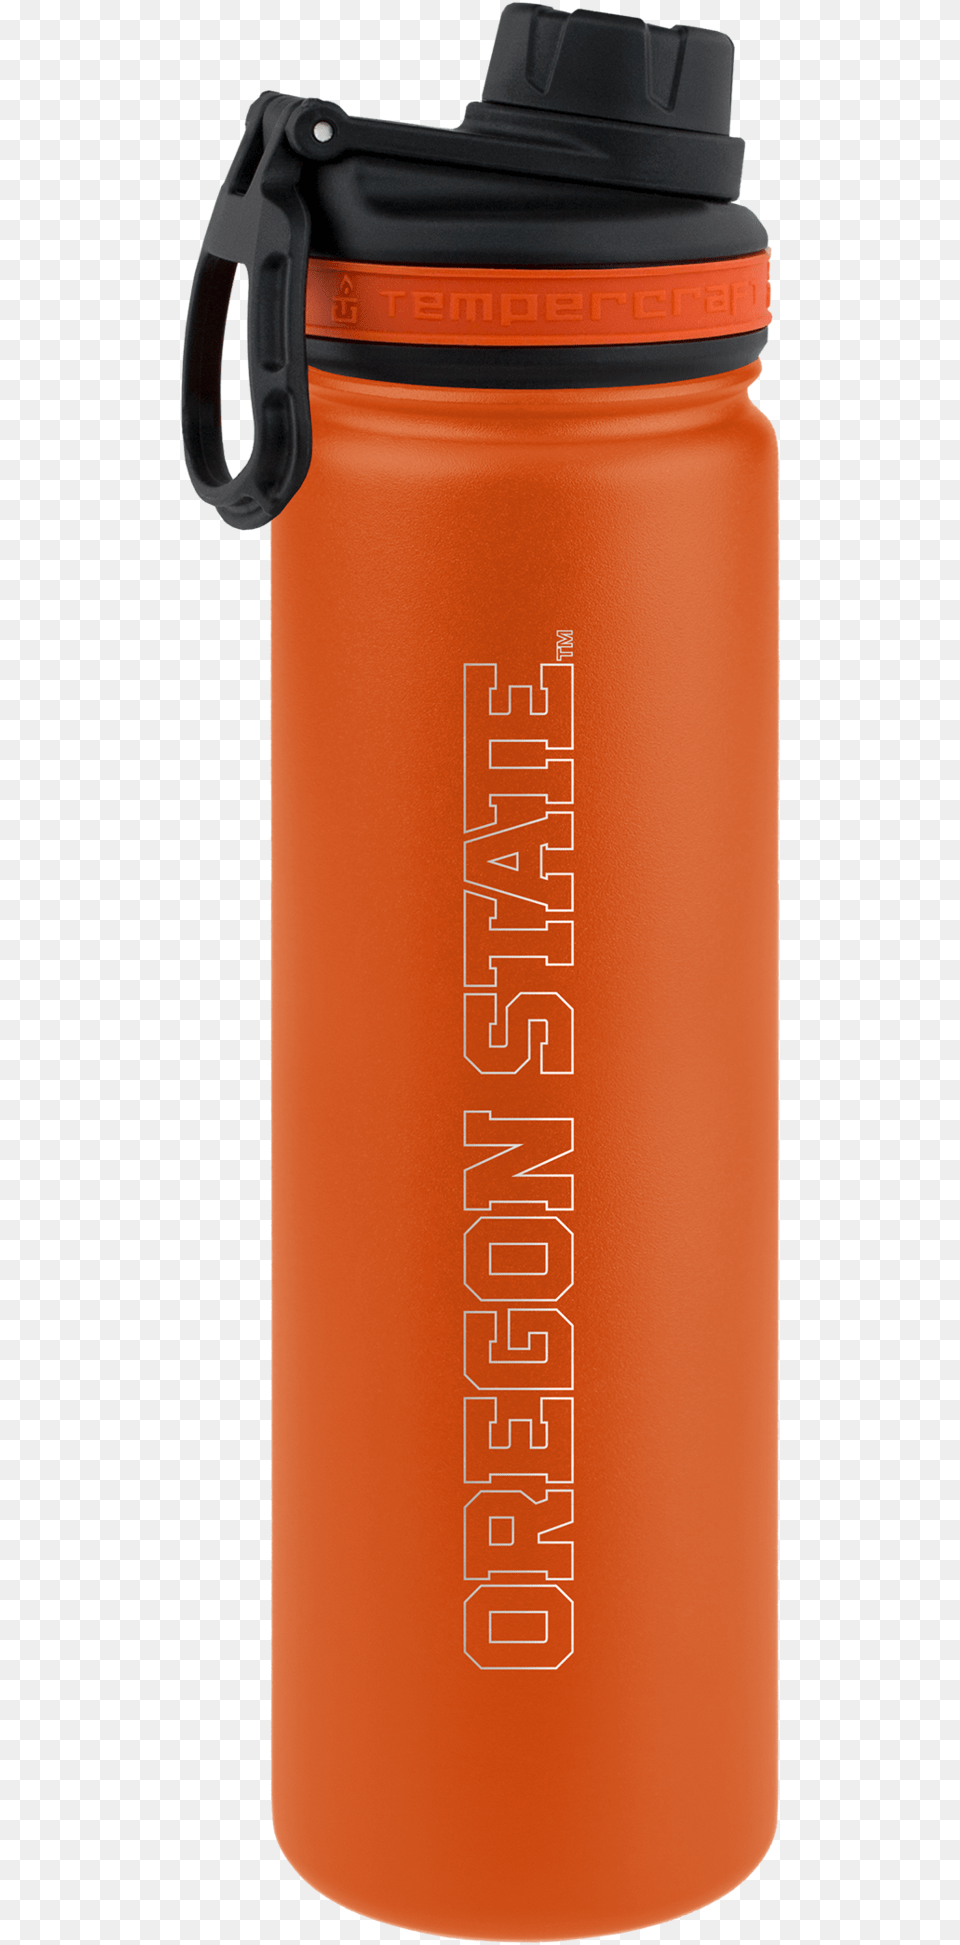 Tempercraftclass Lazyload Lazyload Fade In Cloudzoom Tempercraft, Bottle, Water Bottle, Shaker Png Image